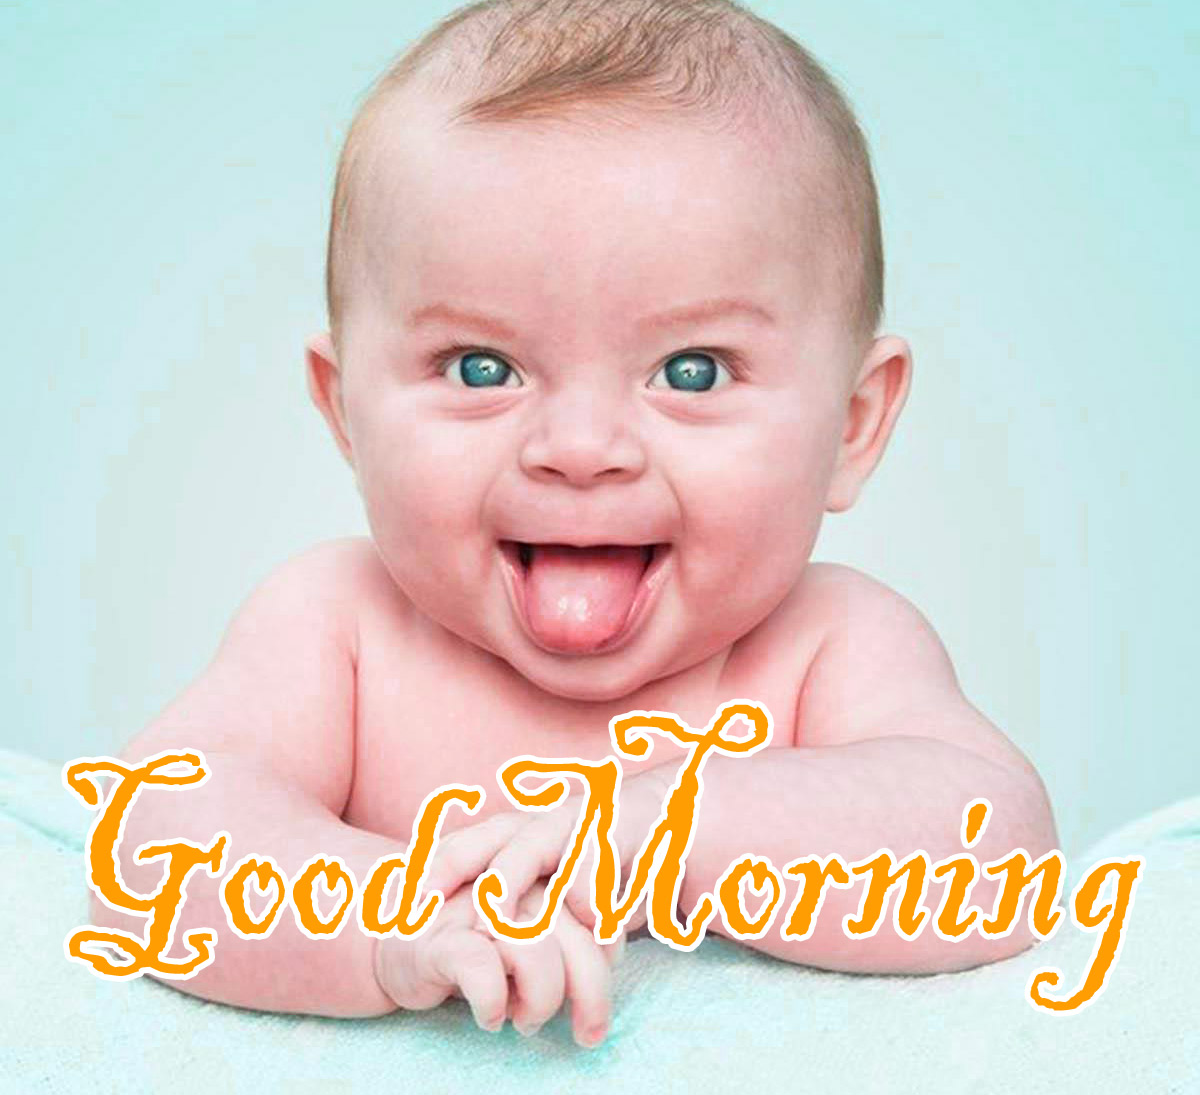 Funny Good Morning Wishes